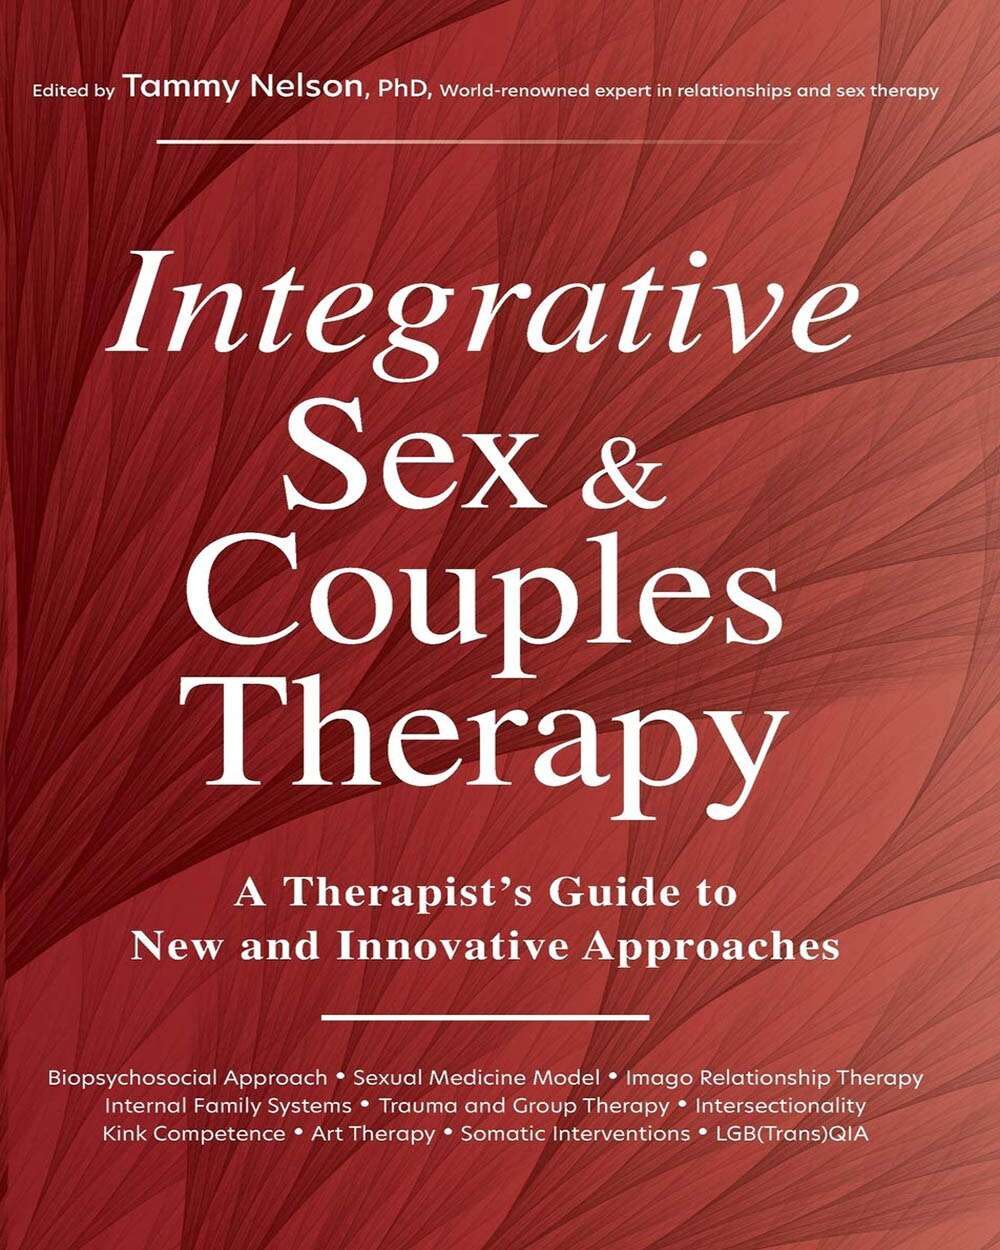 Integrative Sex And Couples Therapy A Therapists Guide To New And Innovative Approaches Ouzod 5135